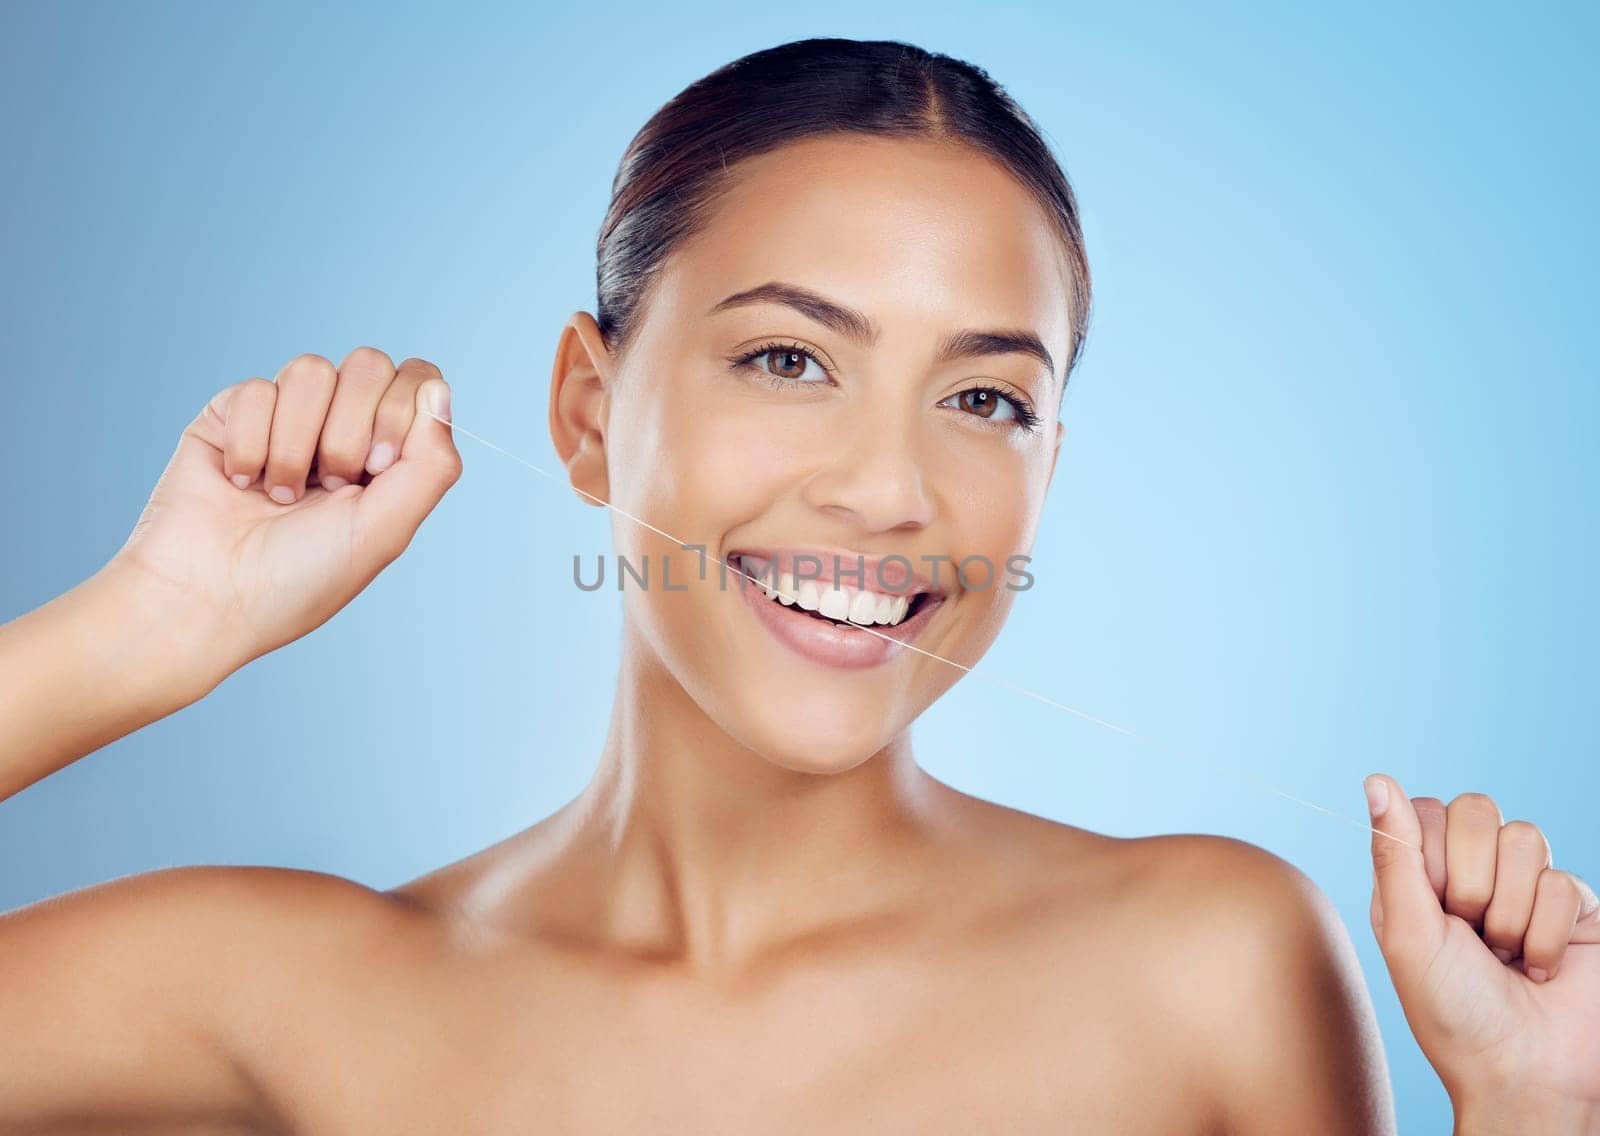 Floss, dental wellness and portrait of woman in studio for beauty, healthy body and hygiene on blue background. Female model, tooth flossing and cleaning mouth for facial smile, breath or happy teeth.